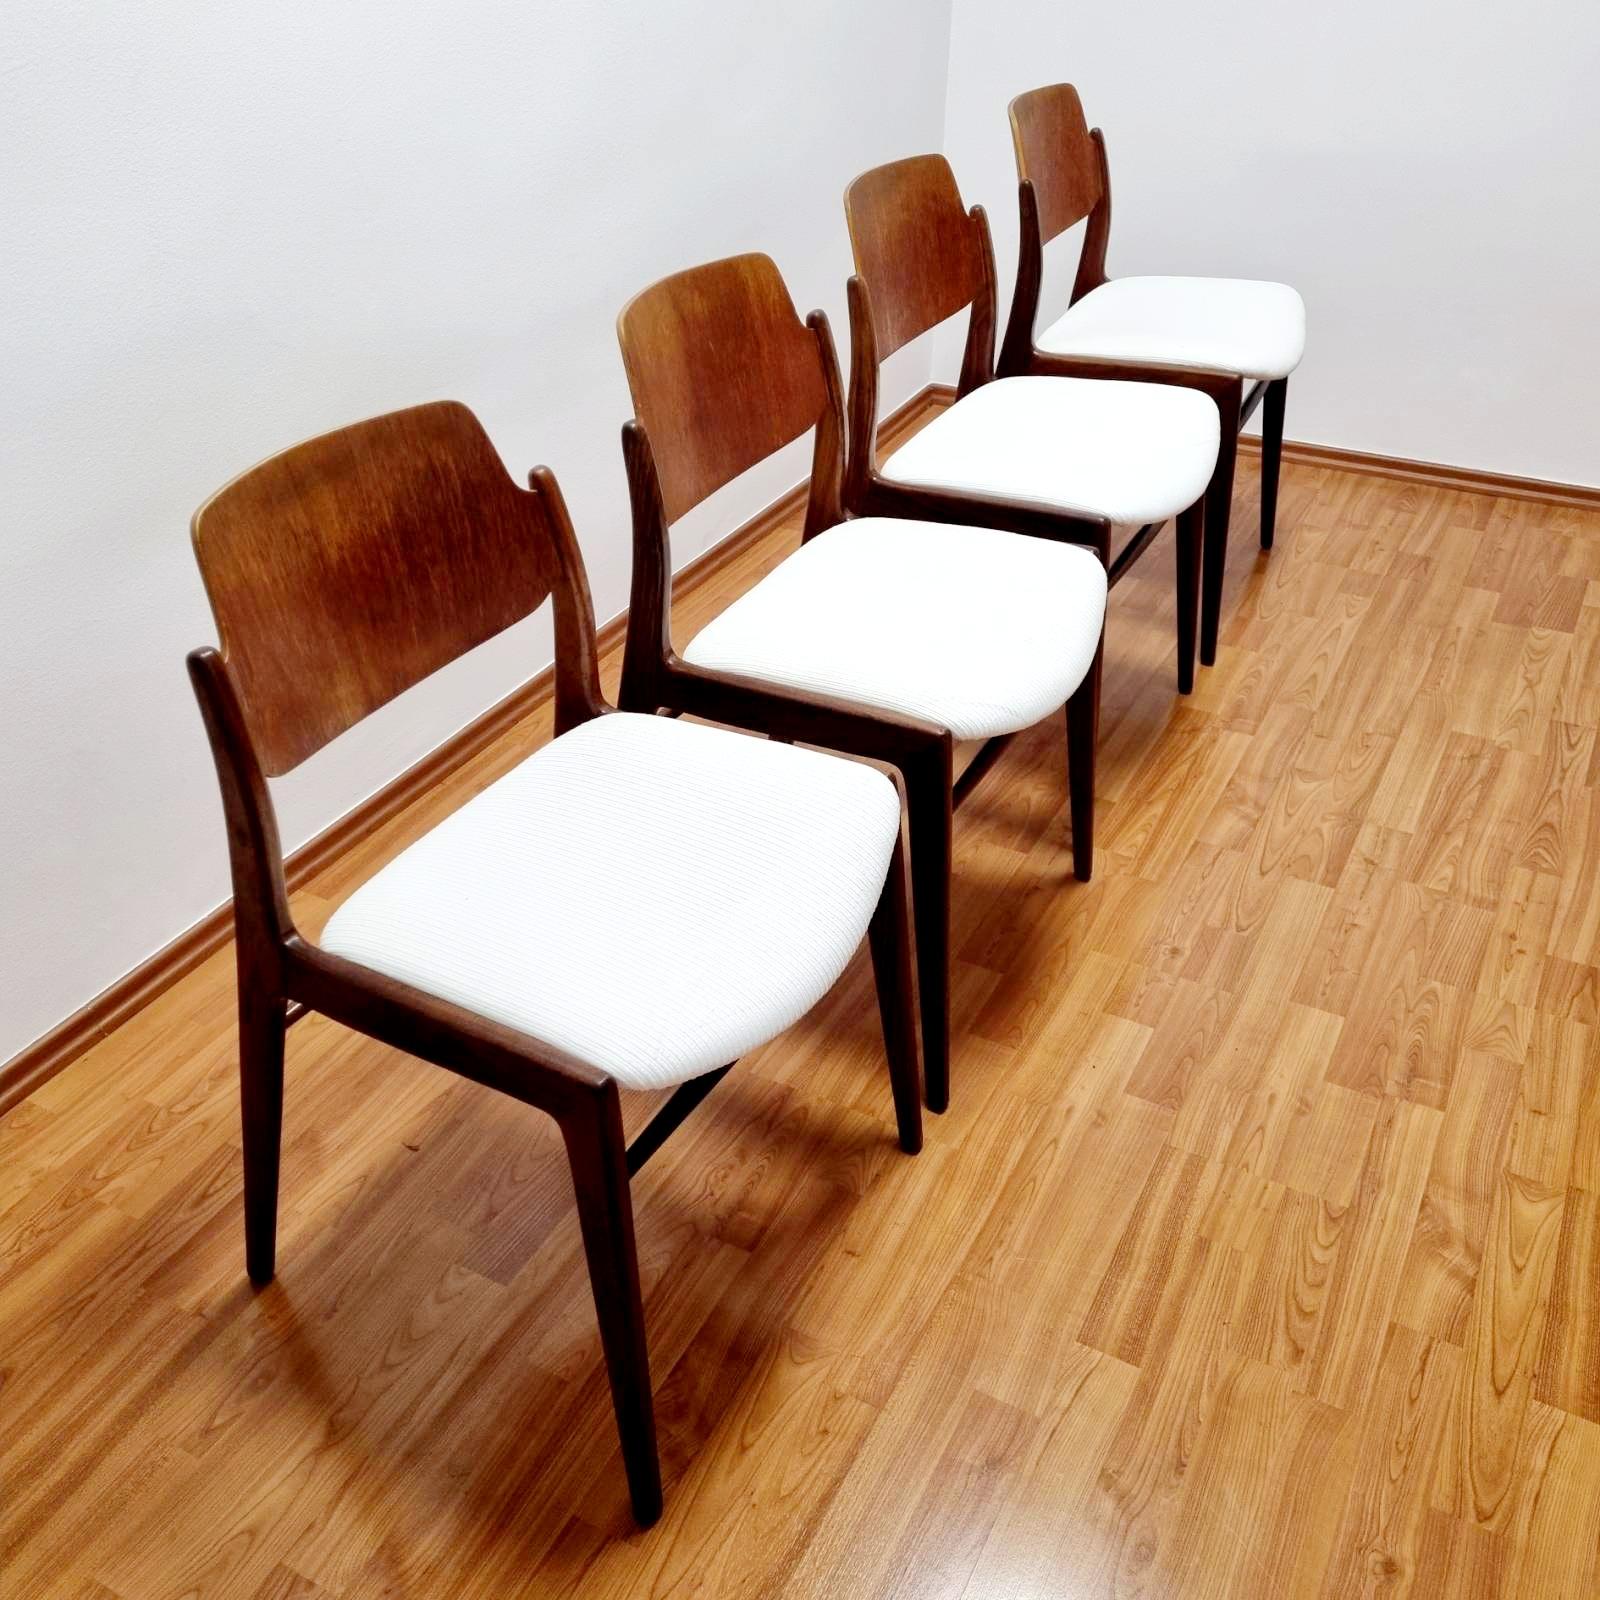 Scandinavian Modern Dining Chairs By Hartmut Lohmeyer For Wilkhahn, Germany 60s For Sale